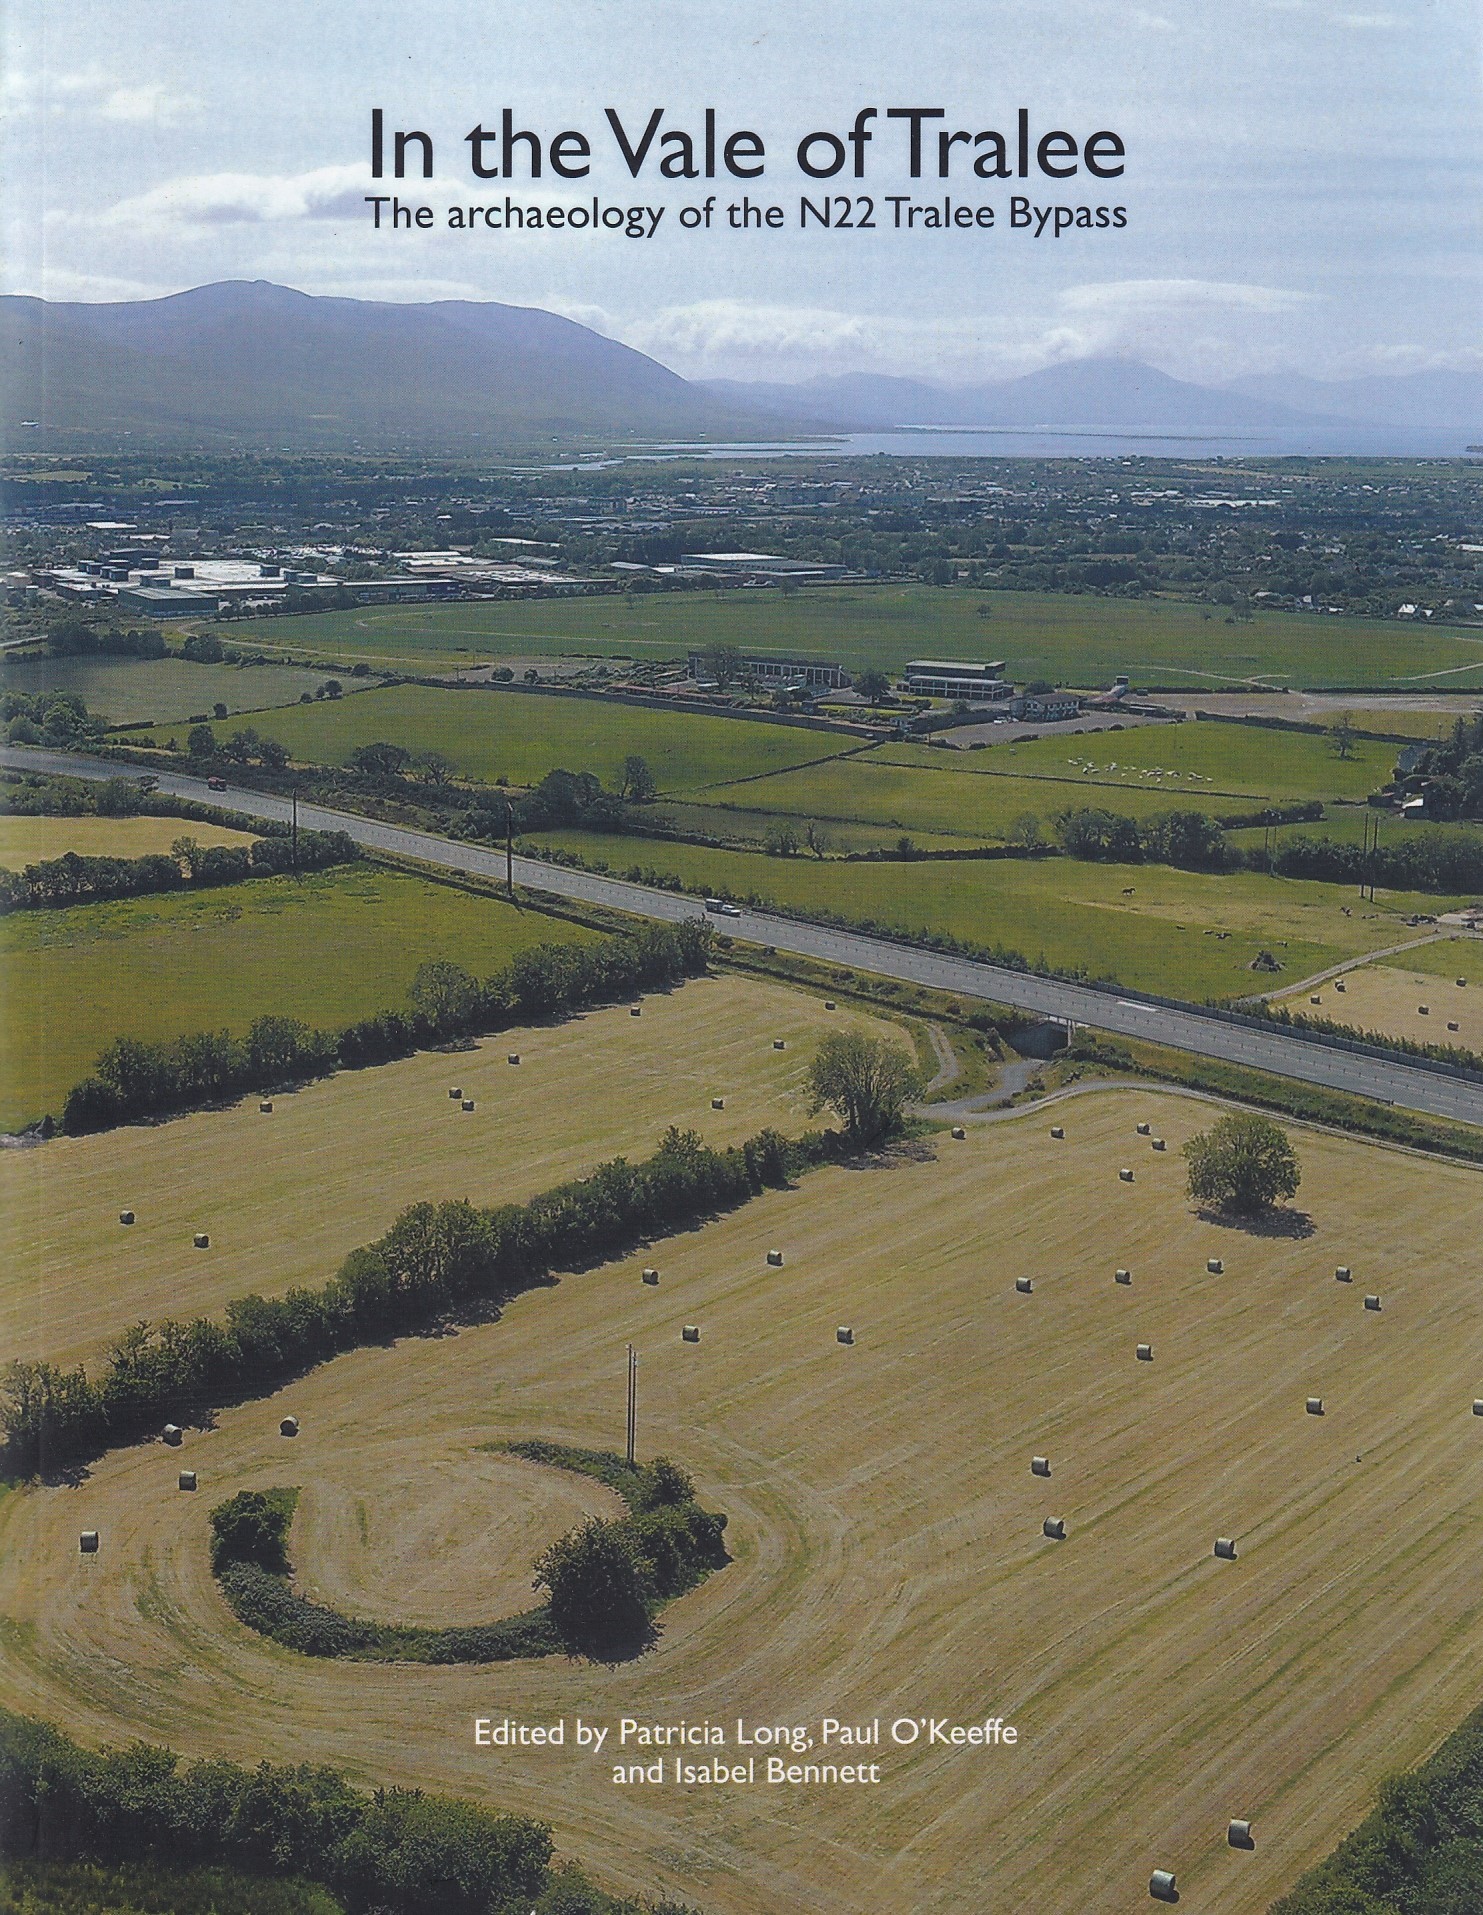 In the Vale of Tralee: The Archaeology of the N22 Tralee Bypass | Patricia Long, Paul O'Keeffe & Isabel Bennett (eds.) | Charlie Byrne's